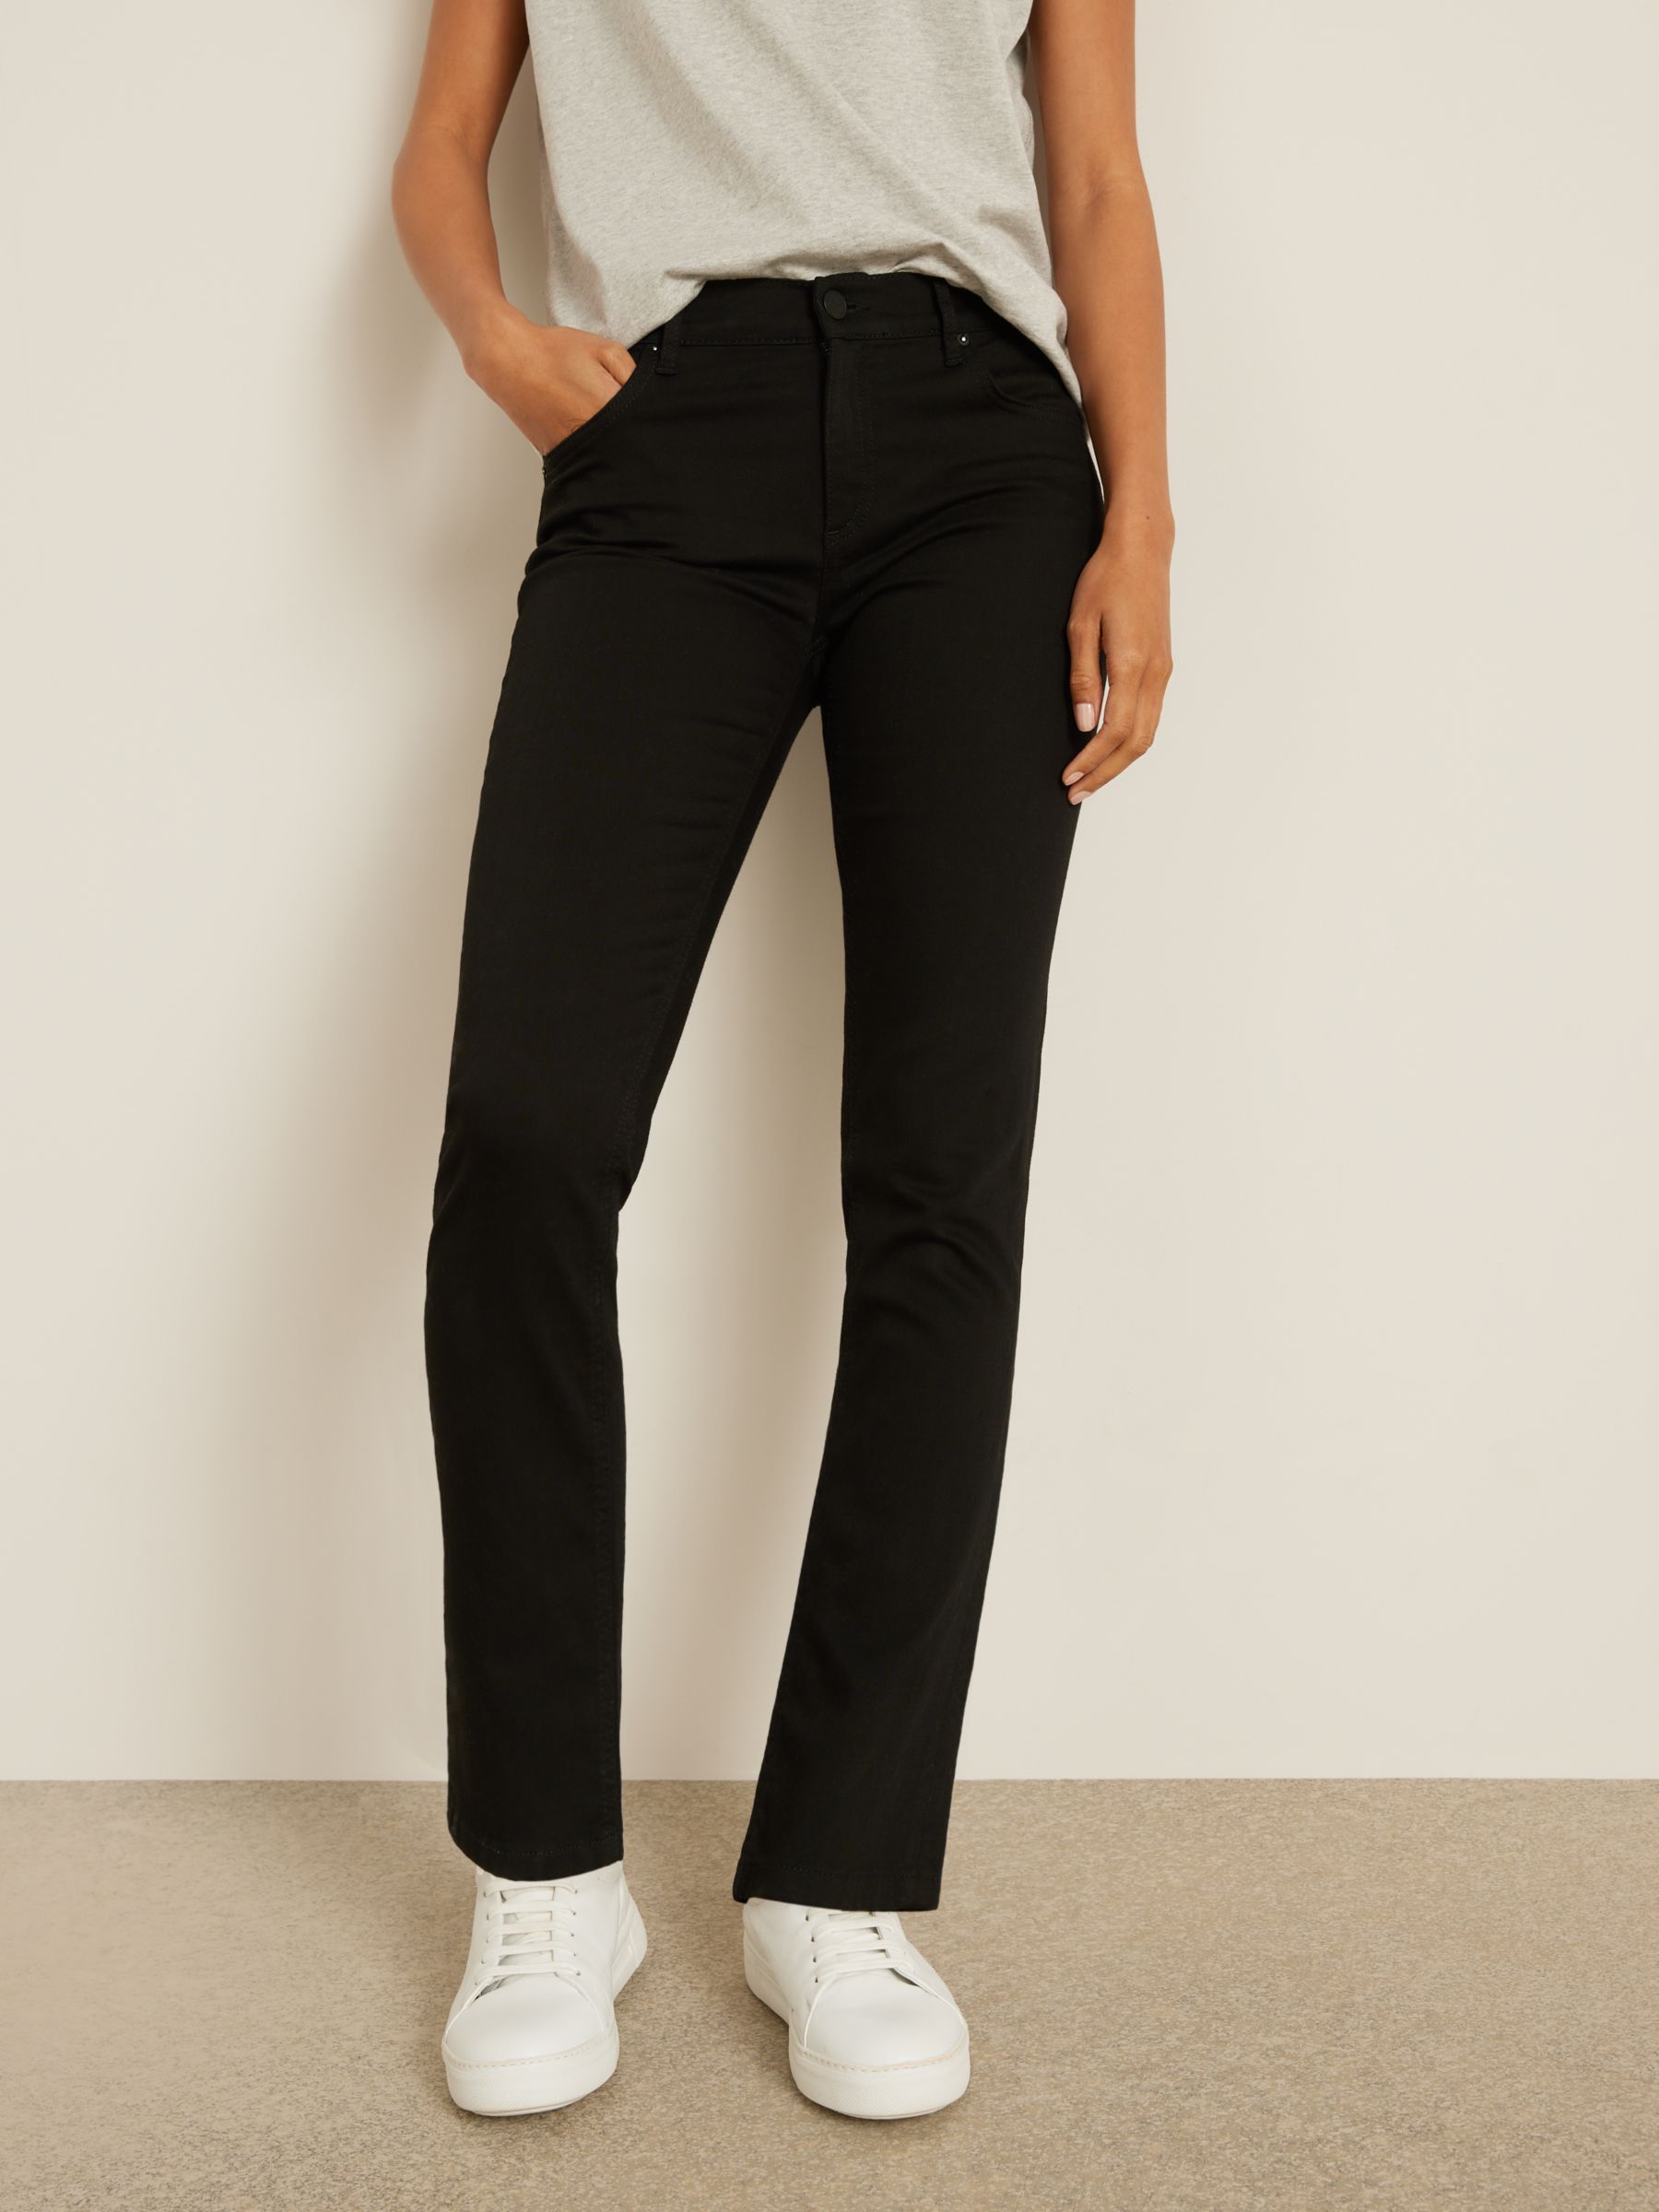 AND/OR Silverlake Straight Leg Jeans, Black at John Lewis & Partners